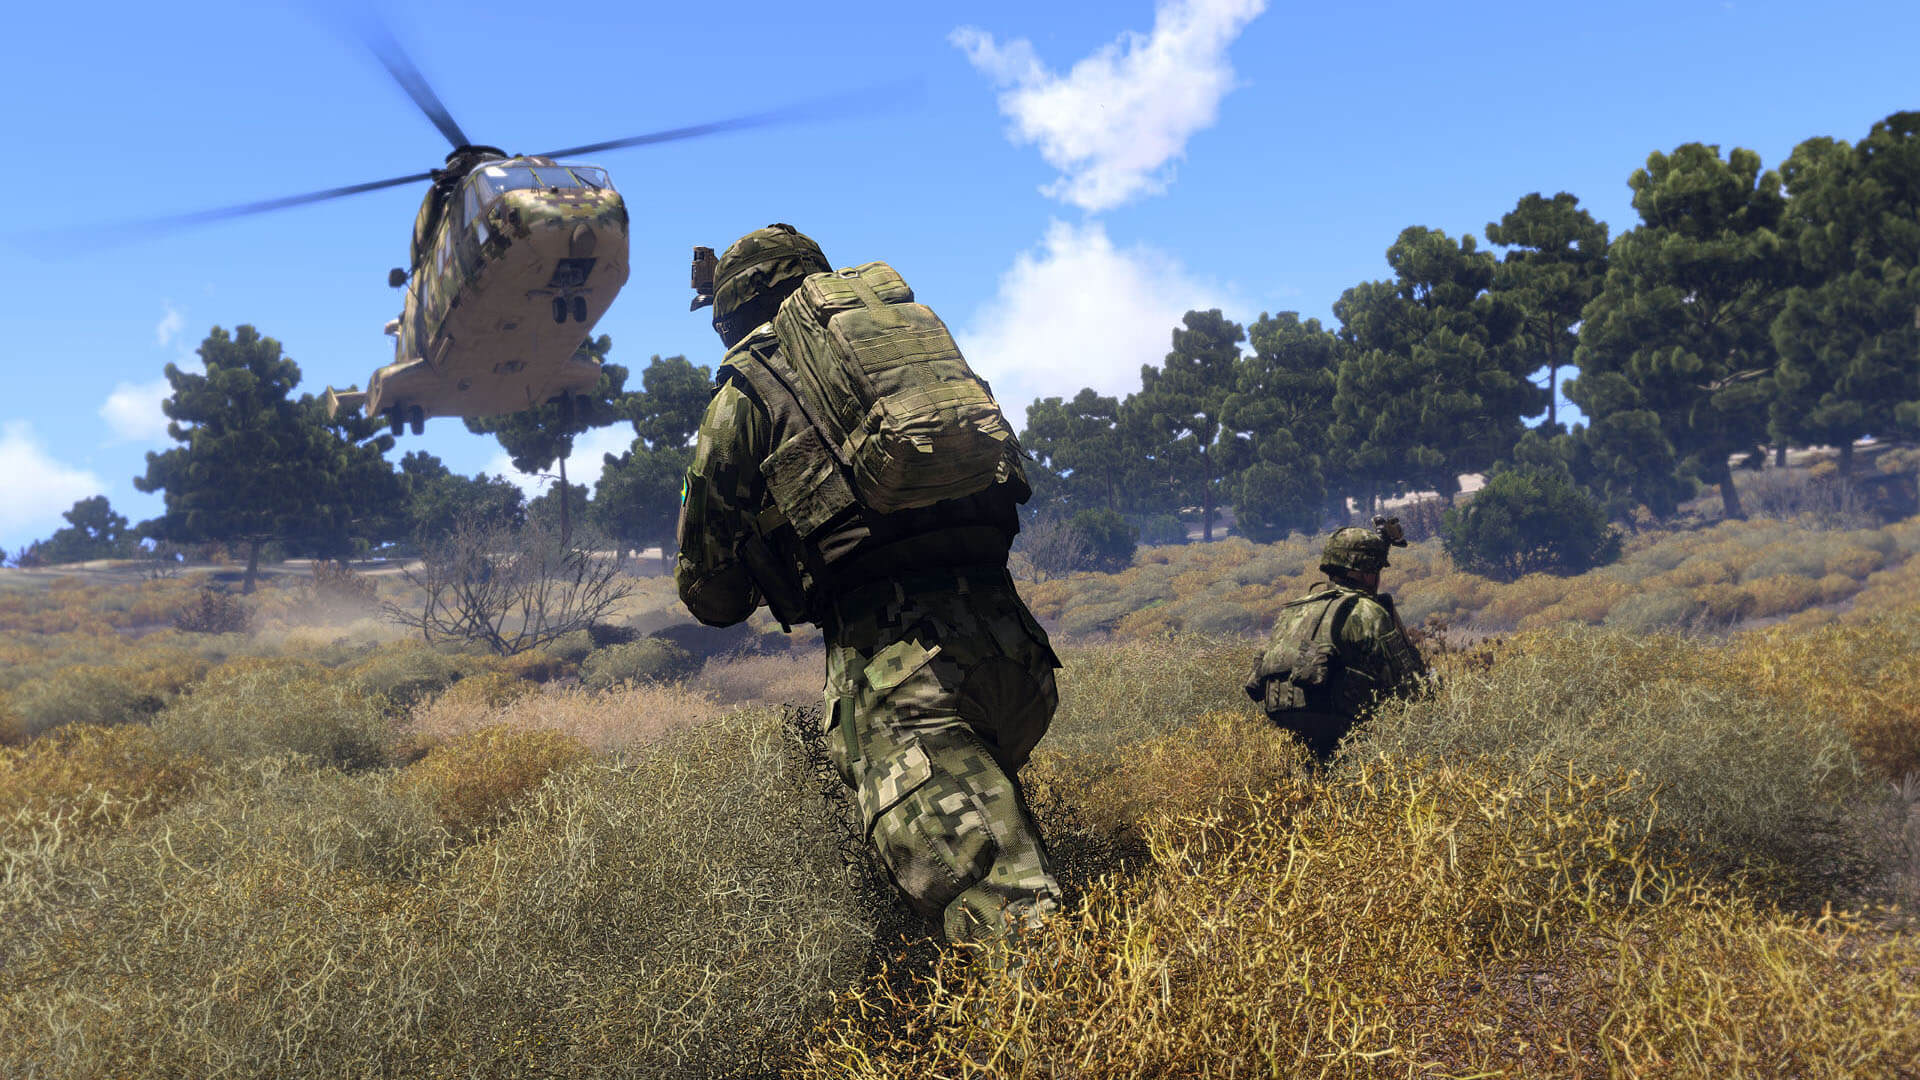 Helicopter landing in Arma 3